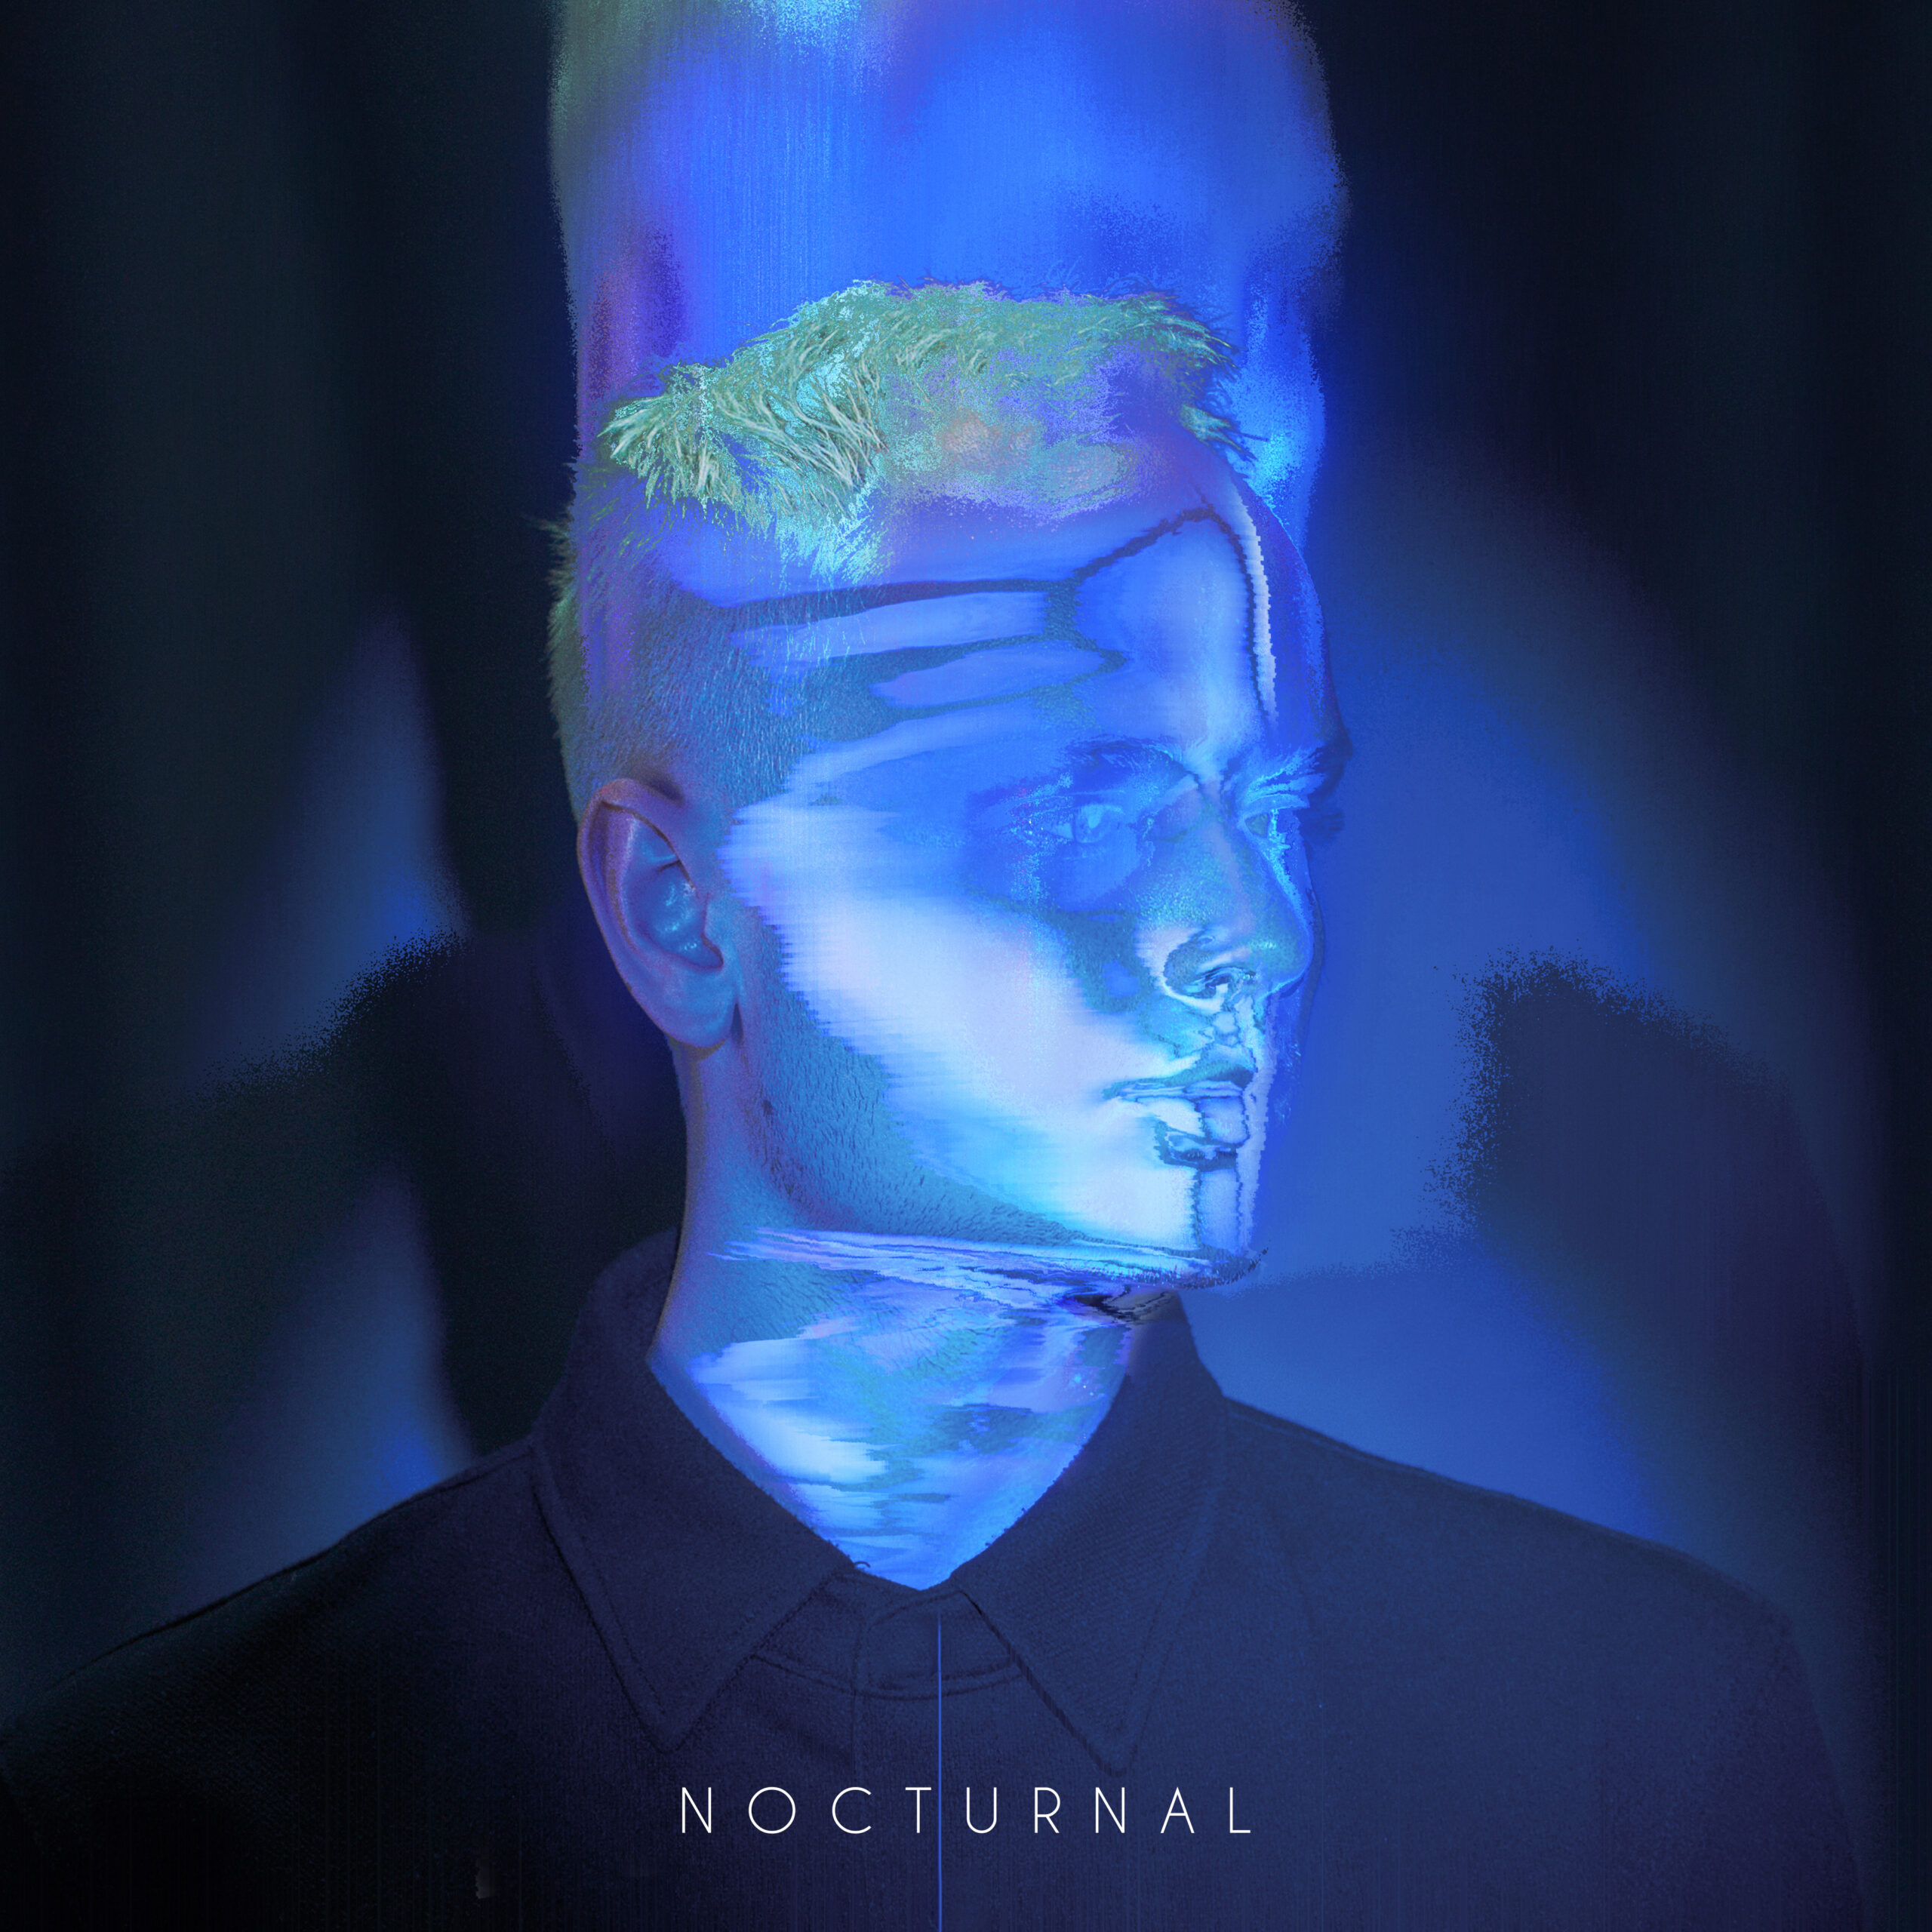 Mortiz Hofbauer drops new single ‘Nocturnal’ from forthcoming album “In A Blurry World”